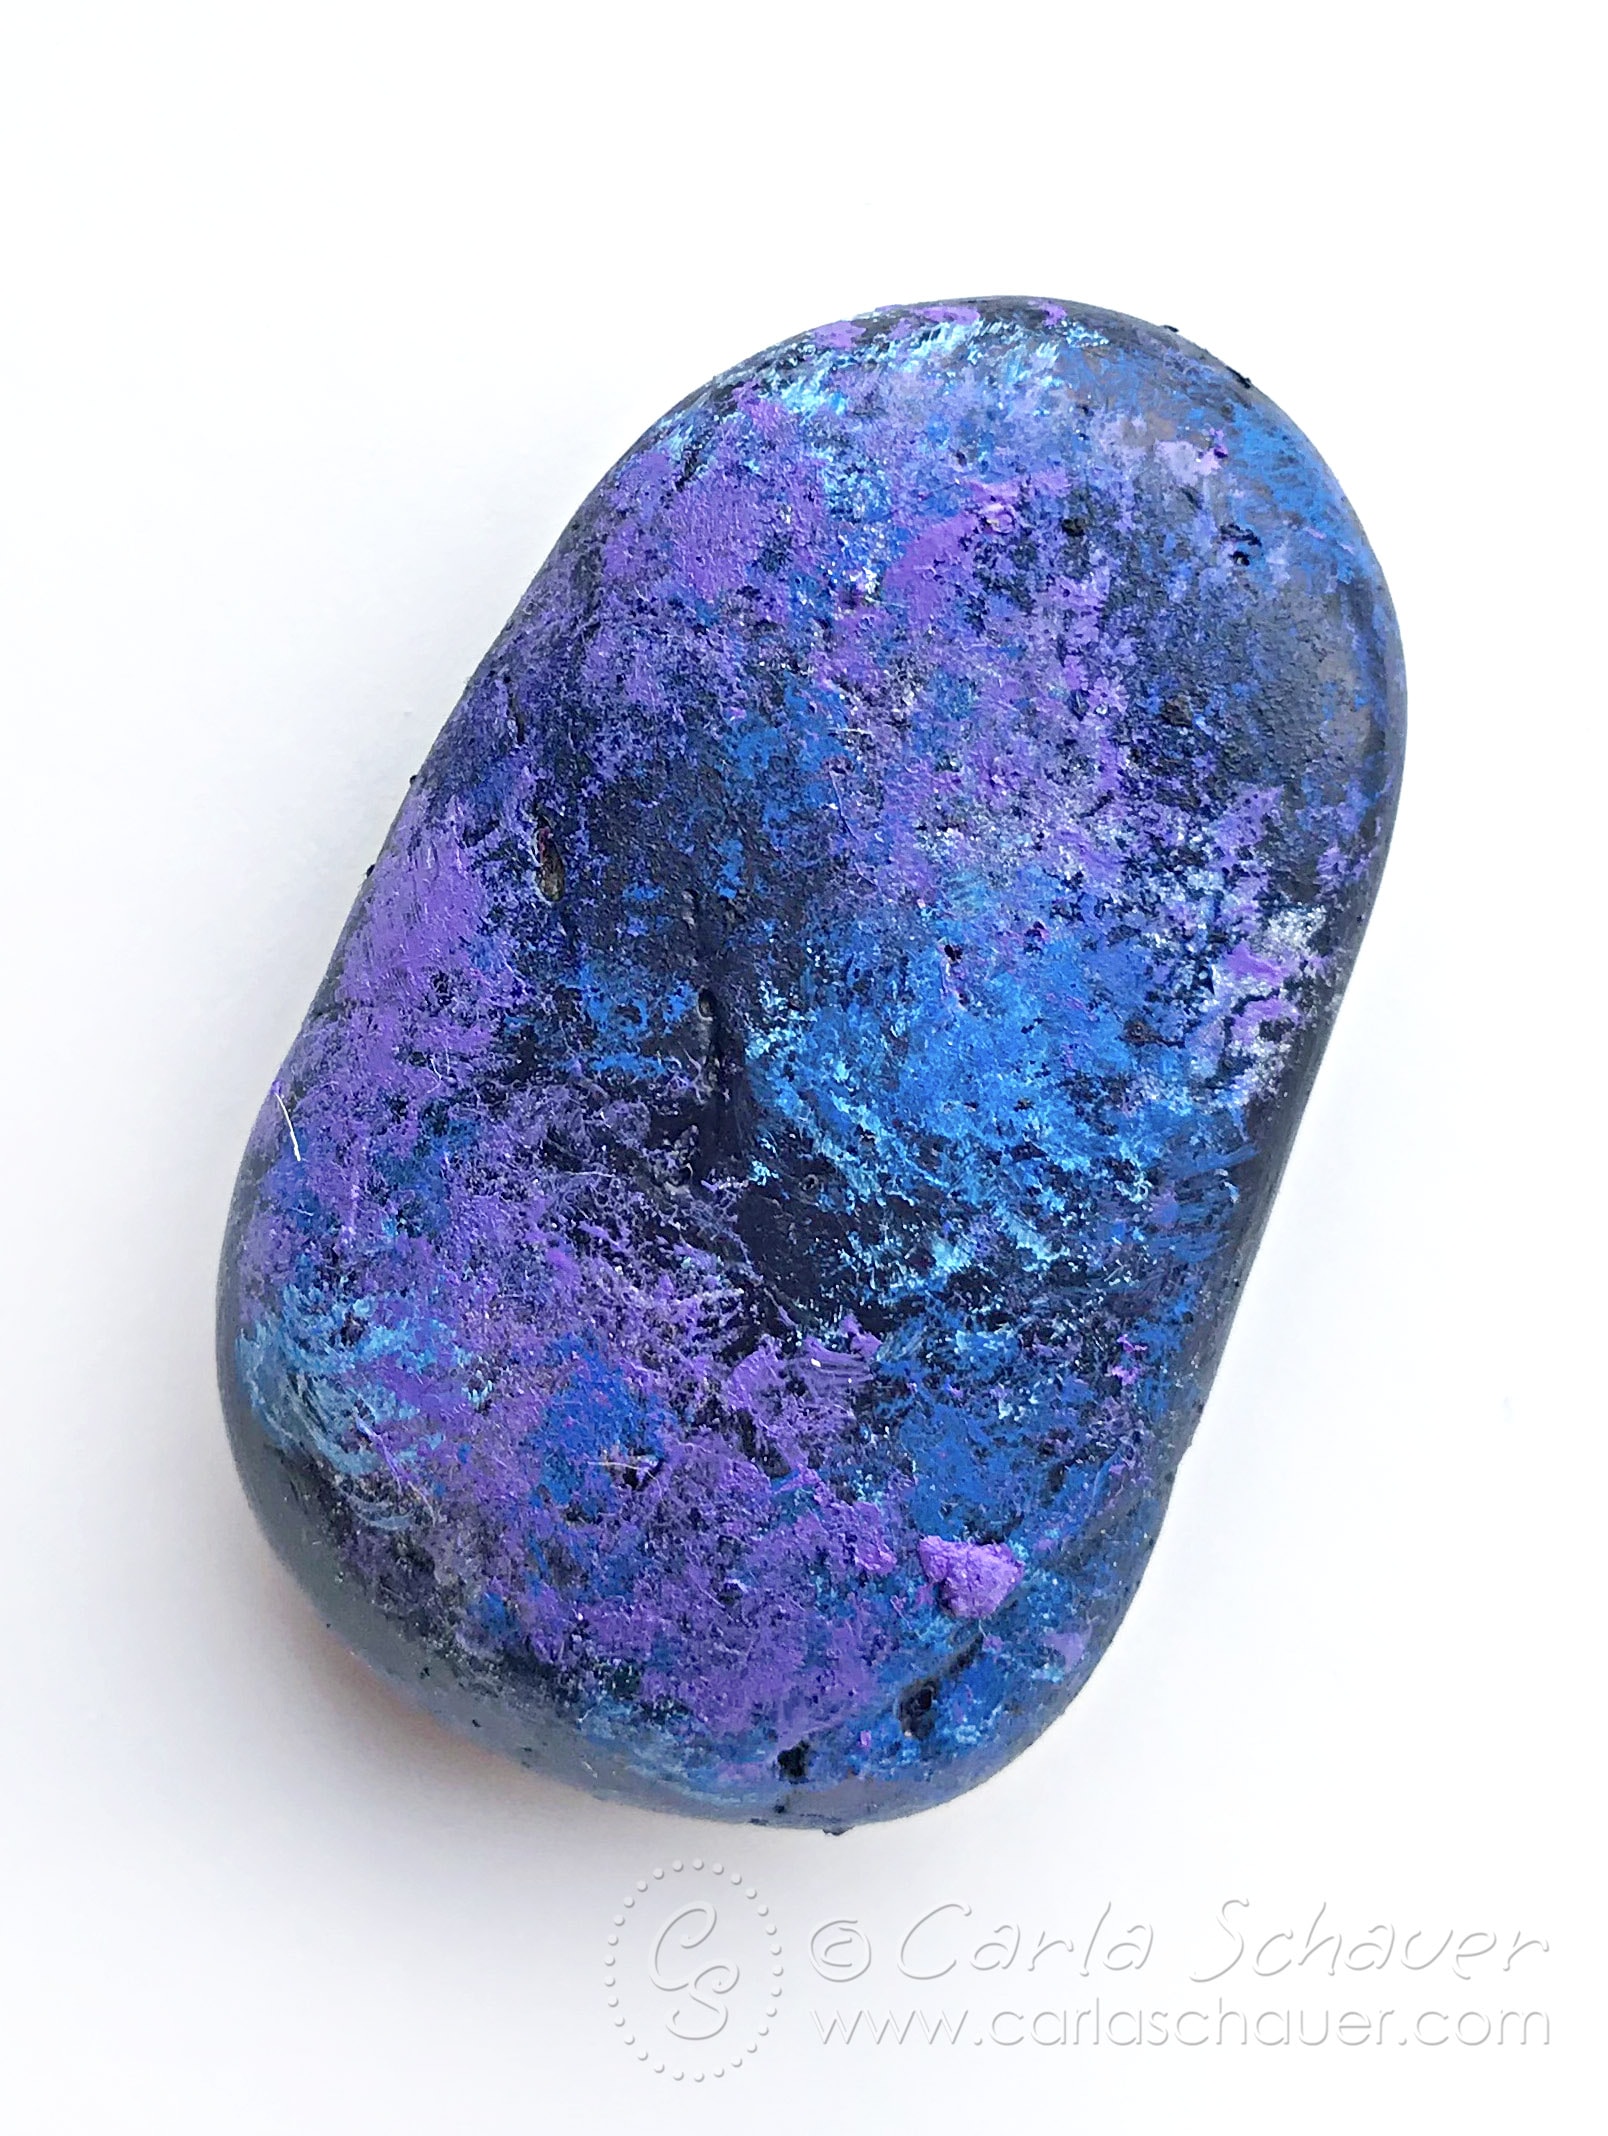 Purple, blue, and black sponge painted rock on white background